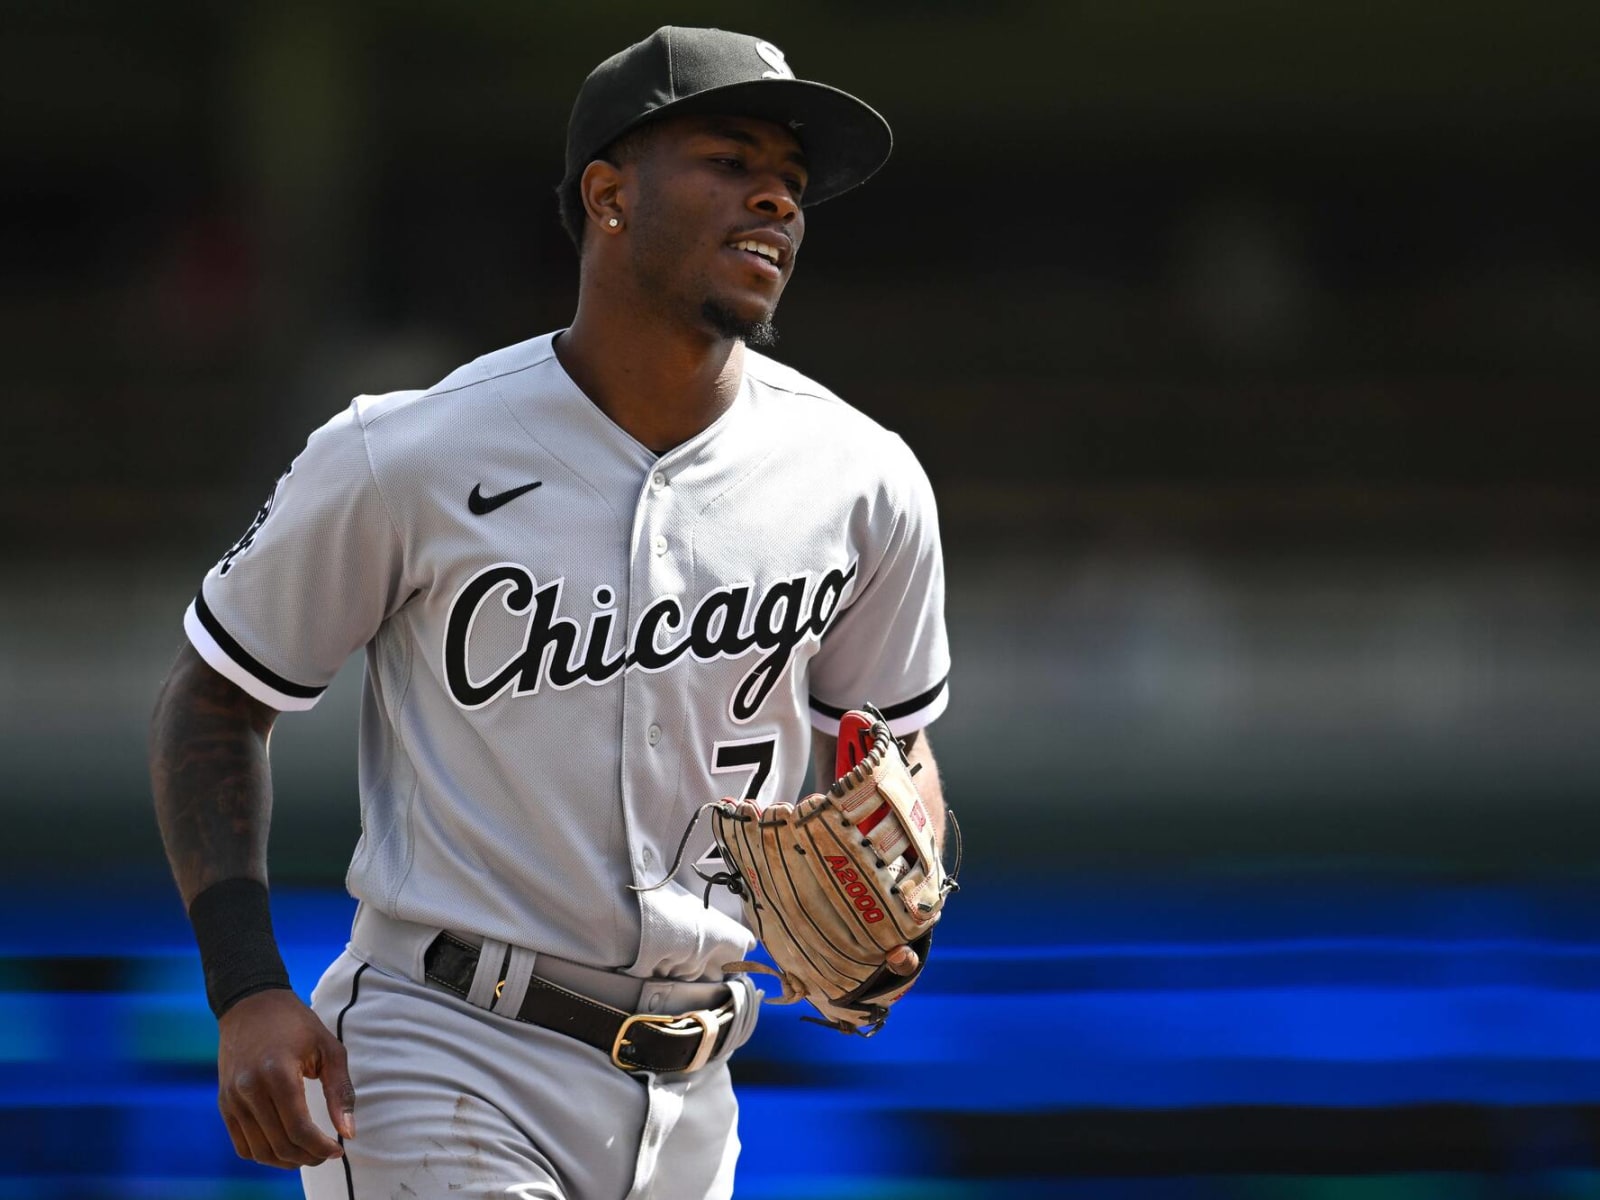 Reports: Andrus rejoining White Sox on one-year, $3 million contract